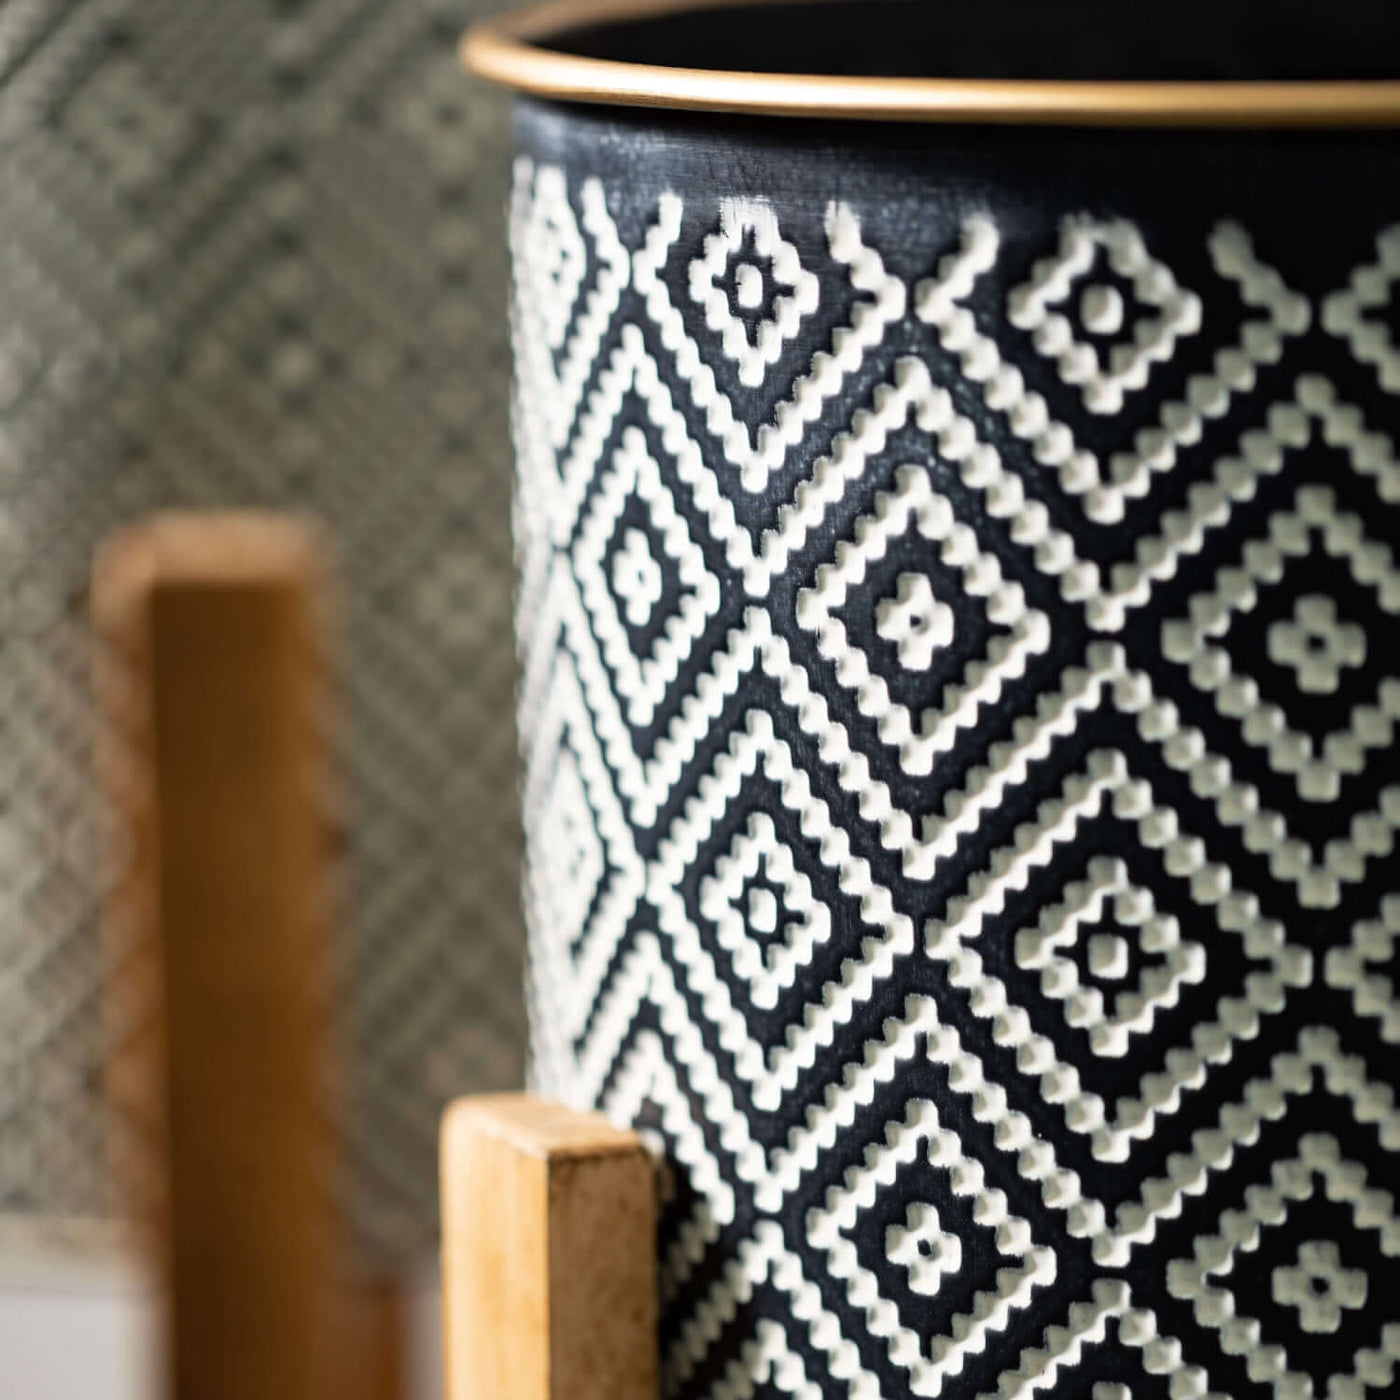 Black Patterned Planters On Stands